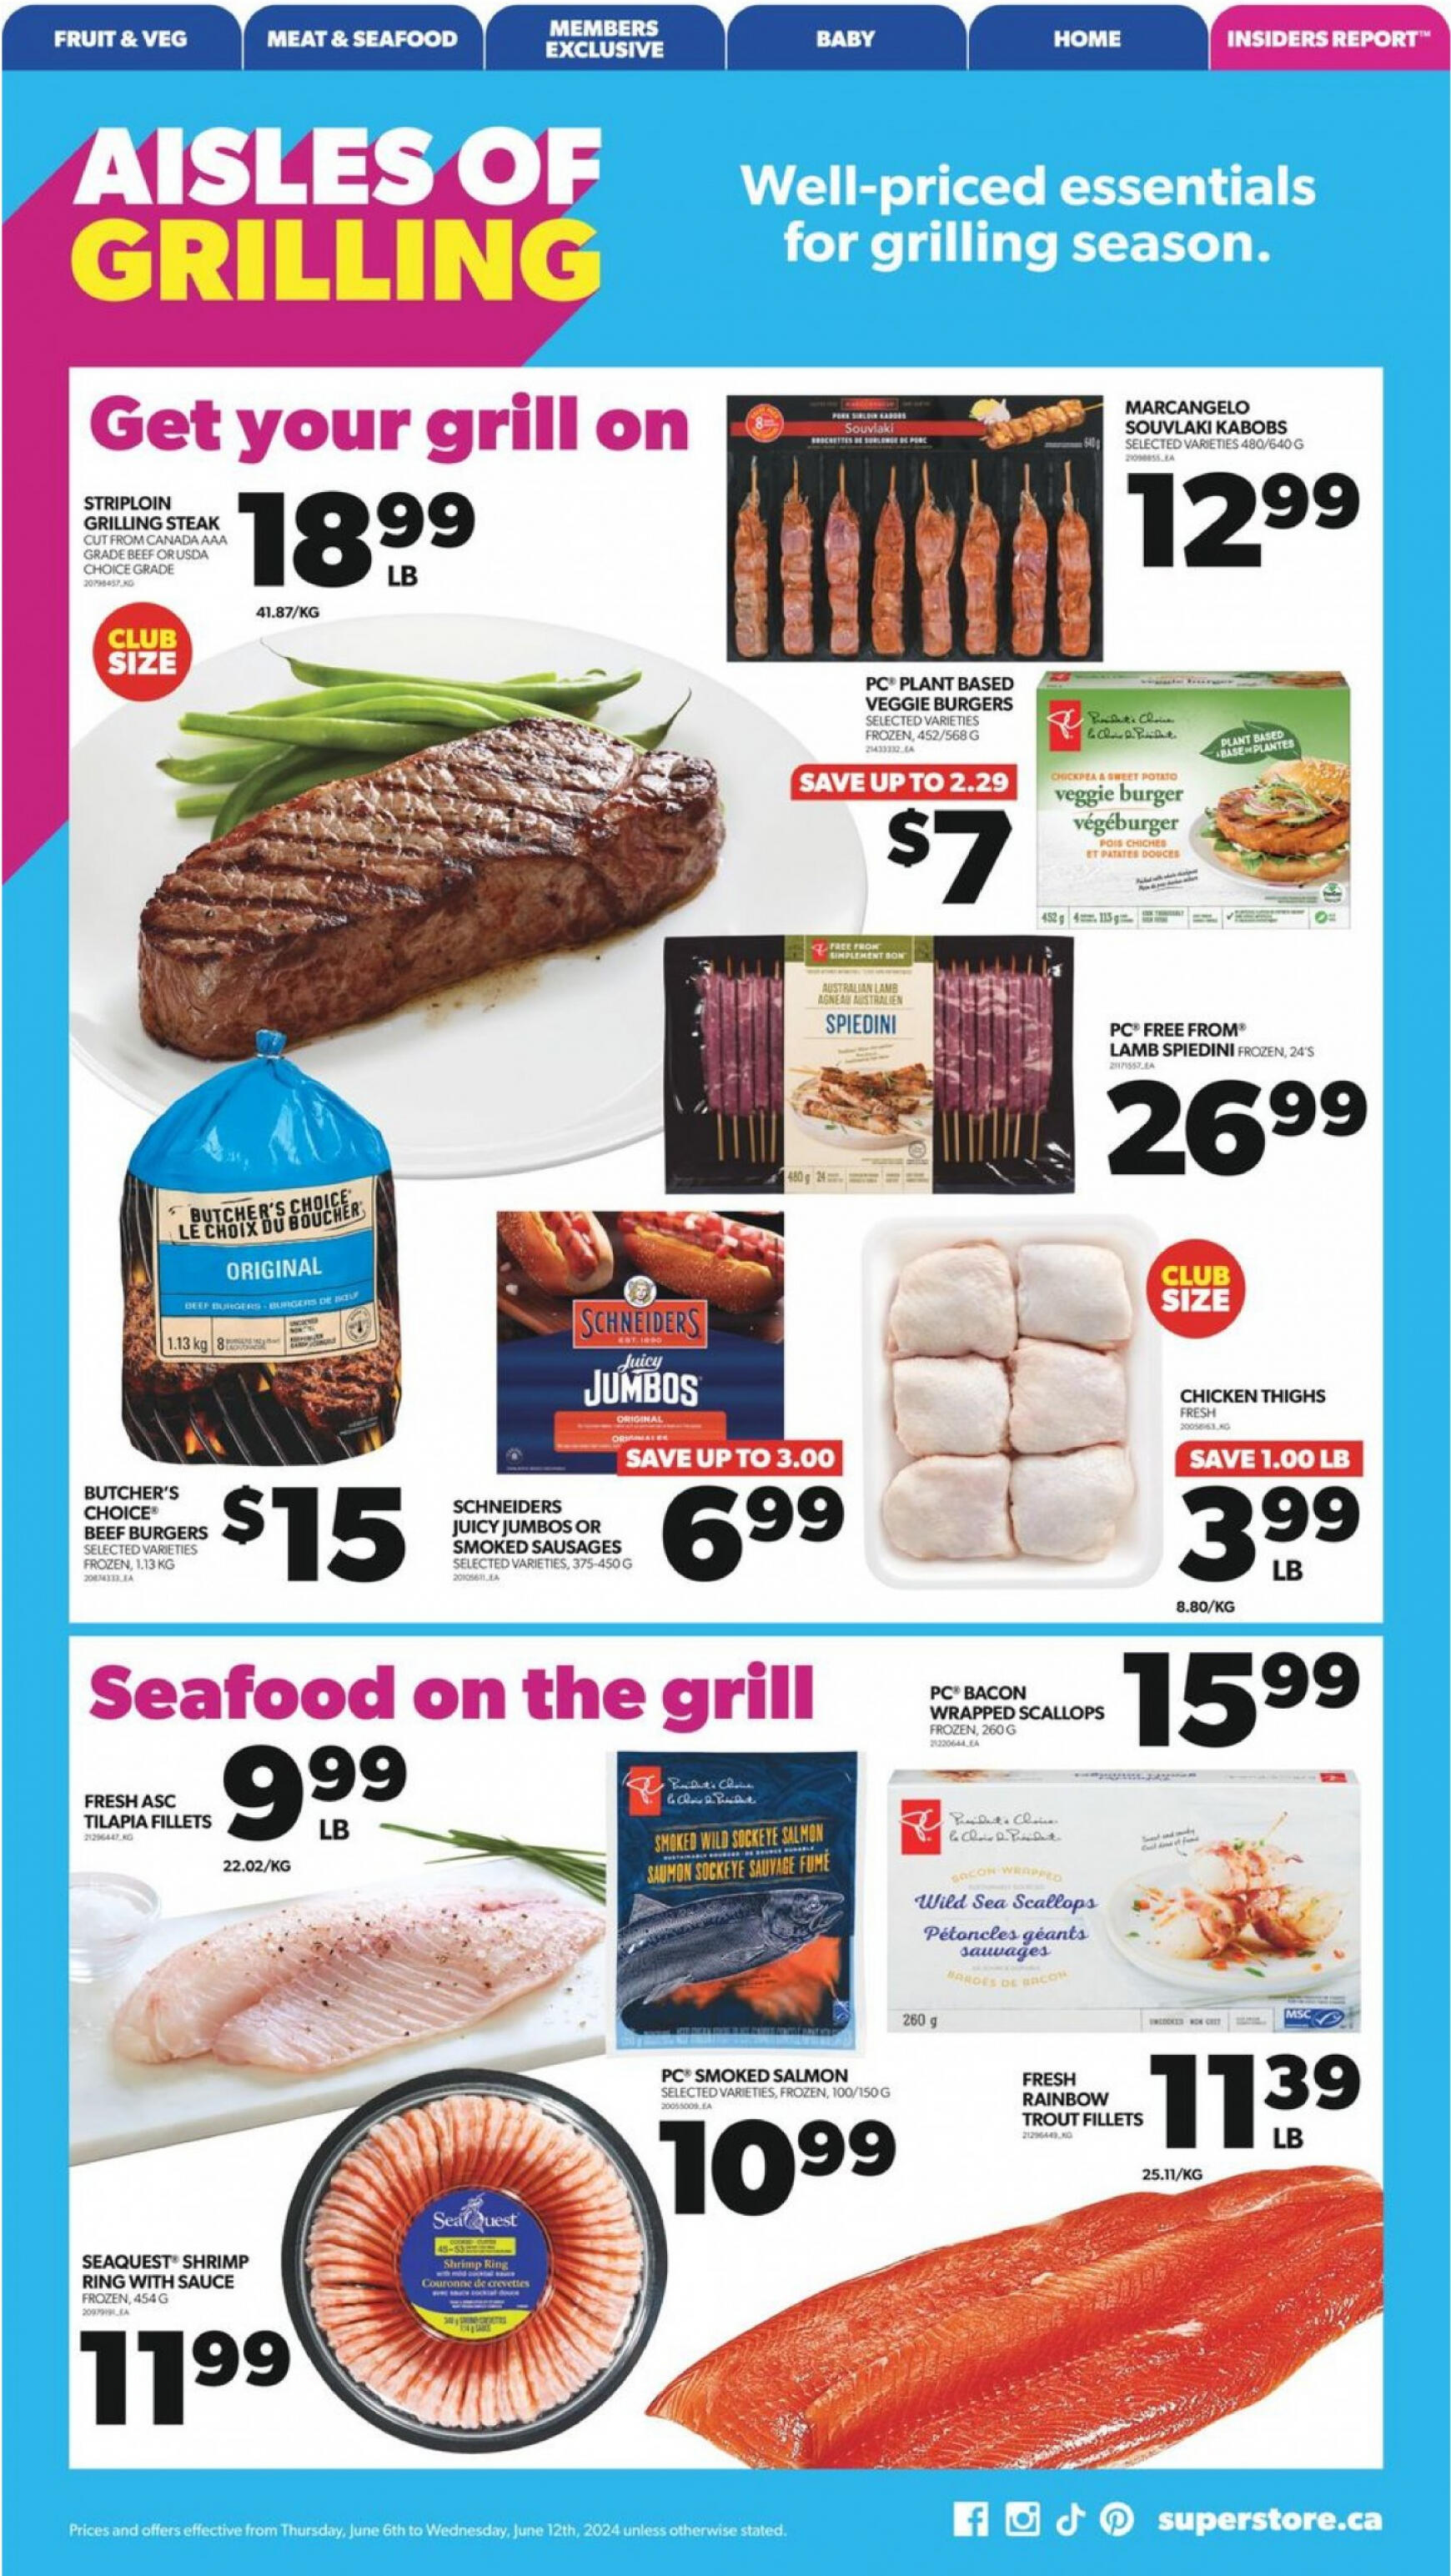 real-canadian-superstore - Real Canadian Superstore flyer current 06.06. - 12.06. - page: 13